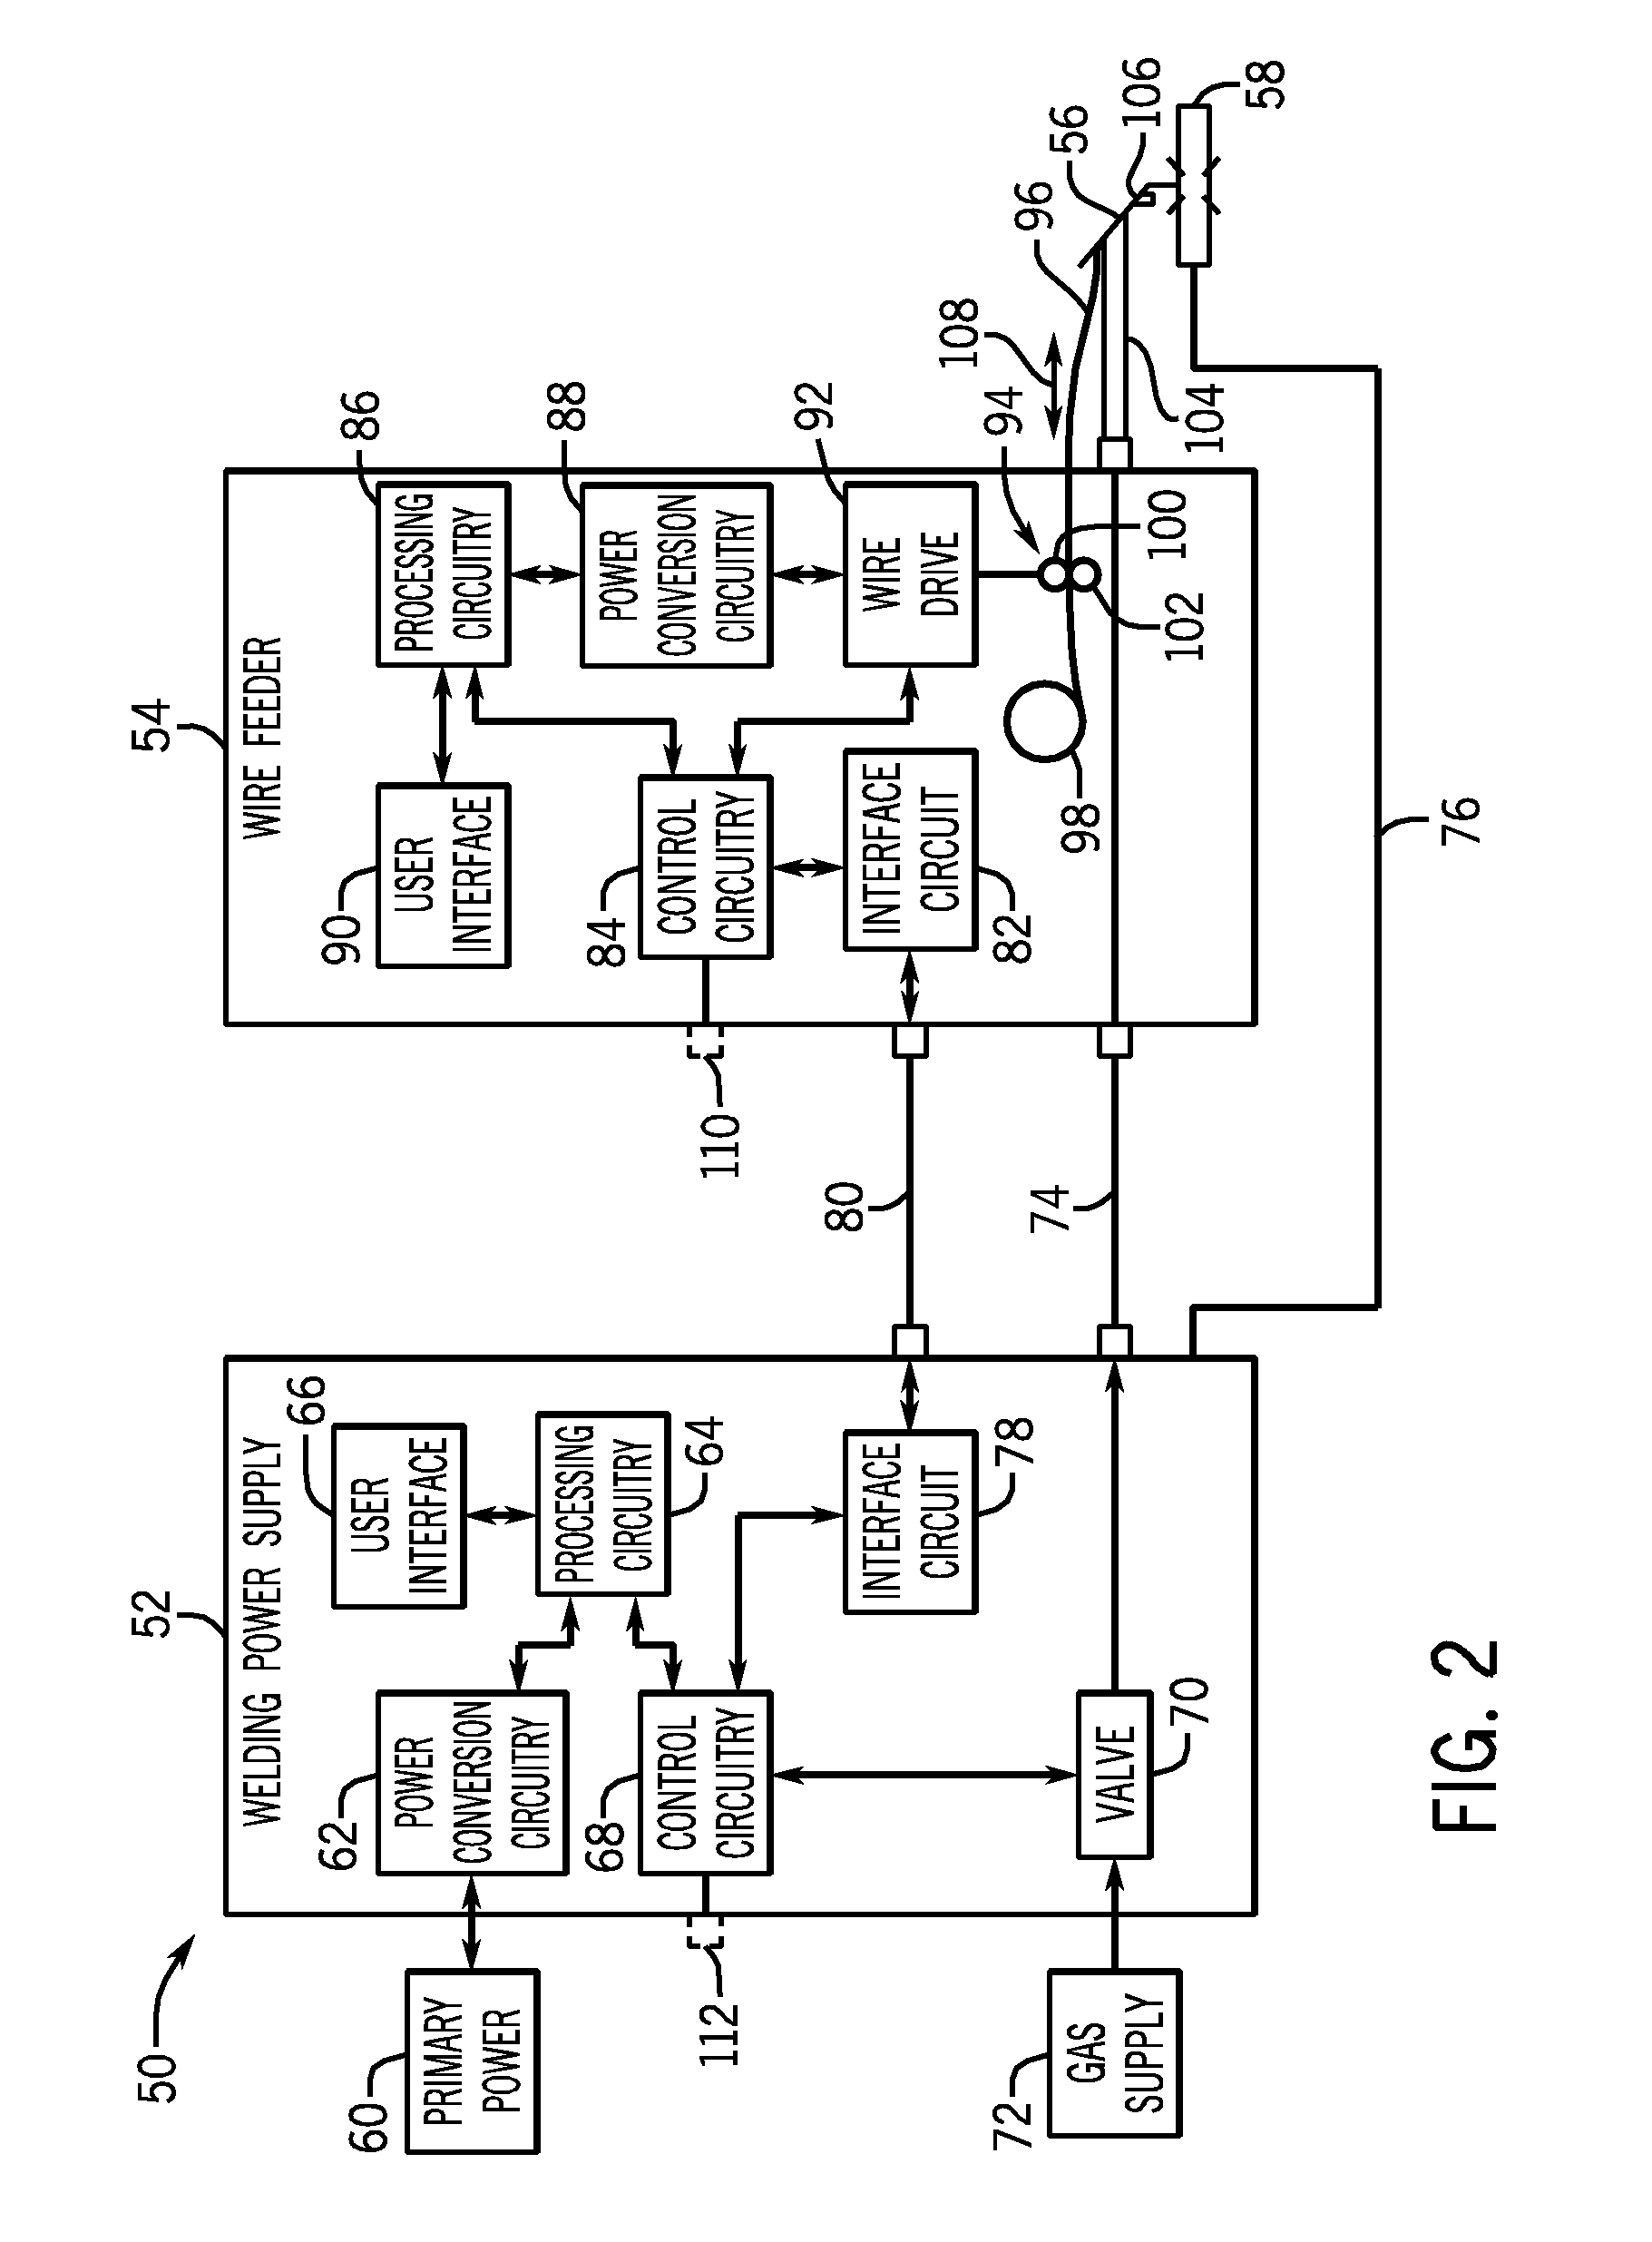 Welding wire retraction system and method